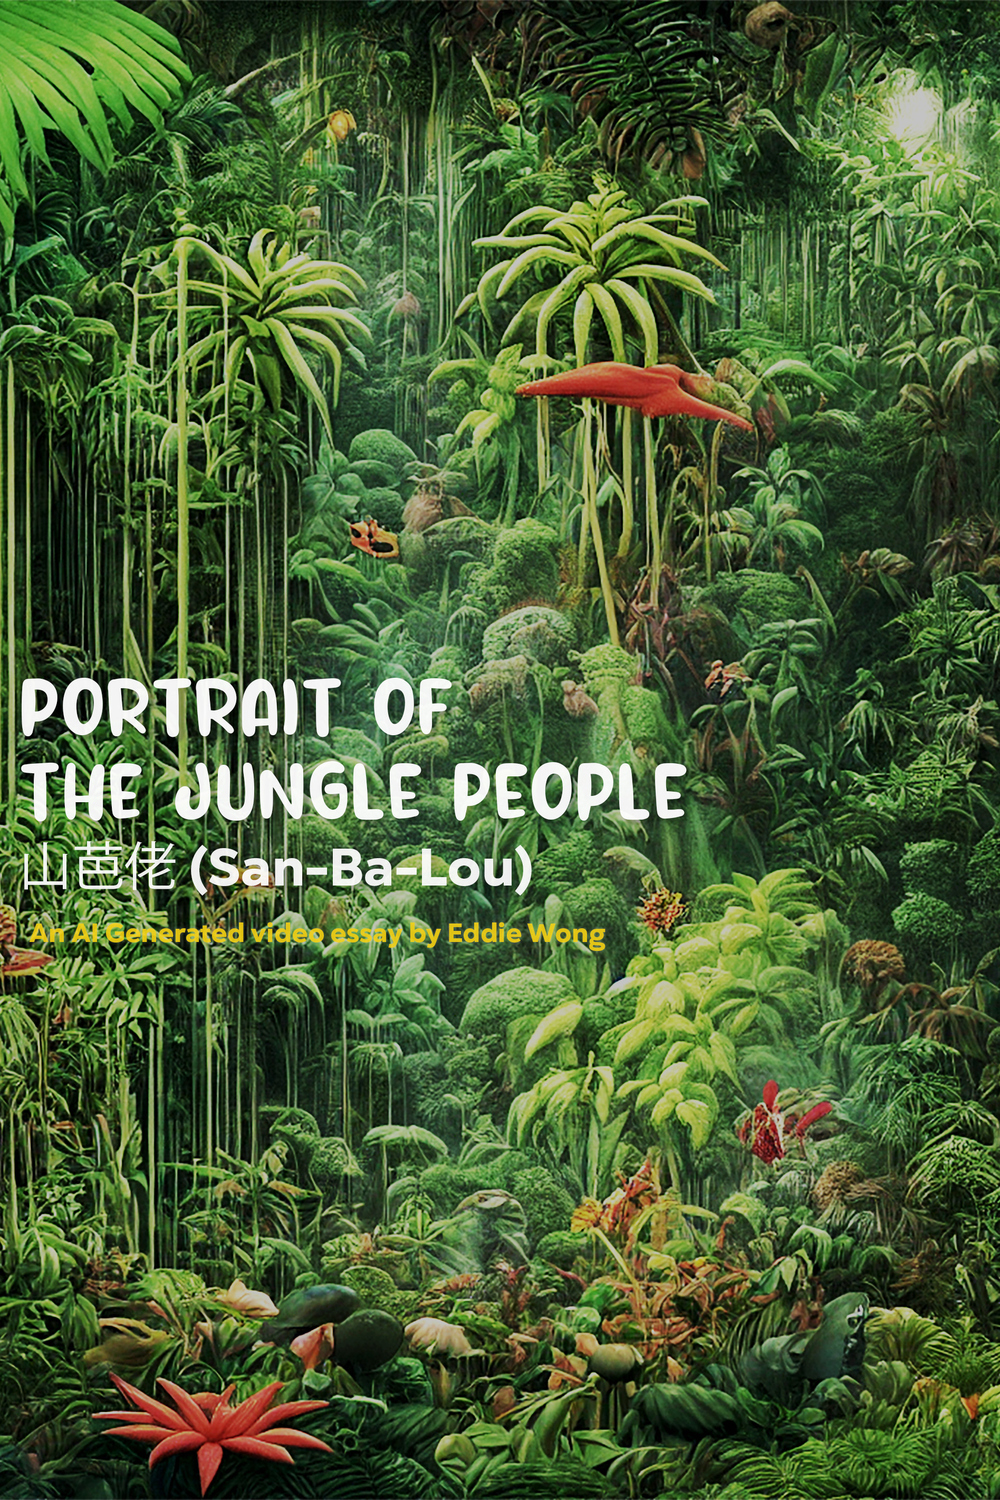 Portrait of the Jungle People